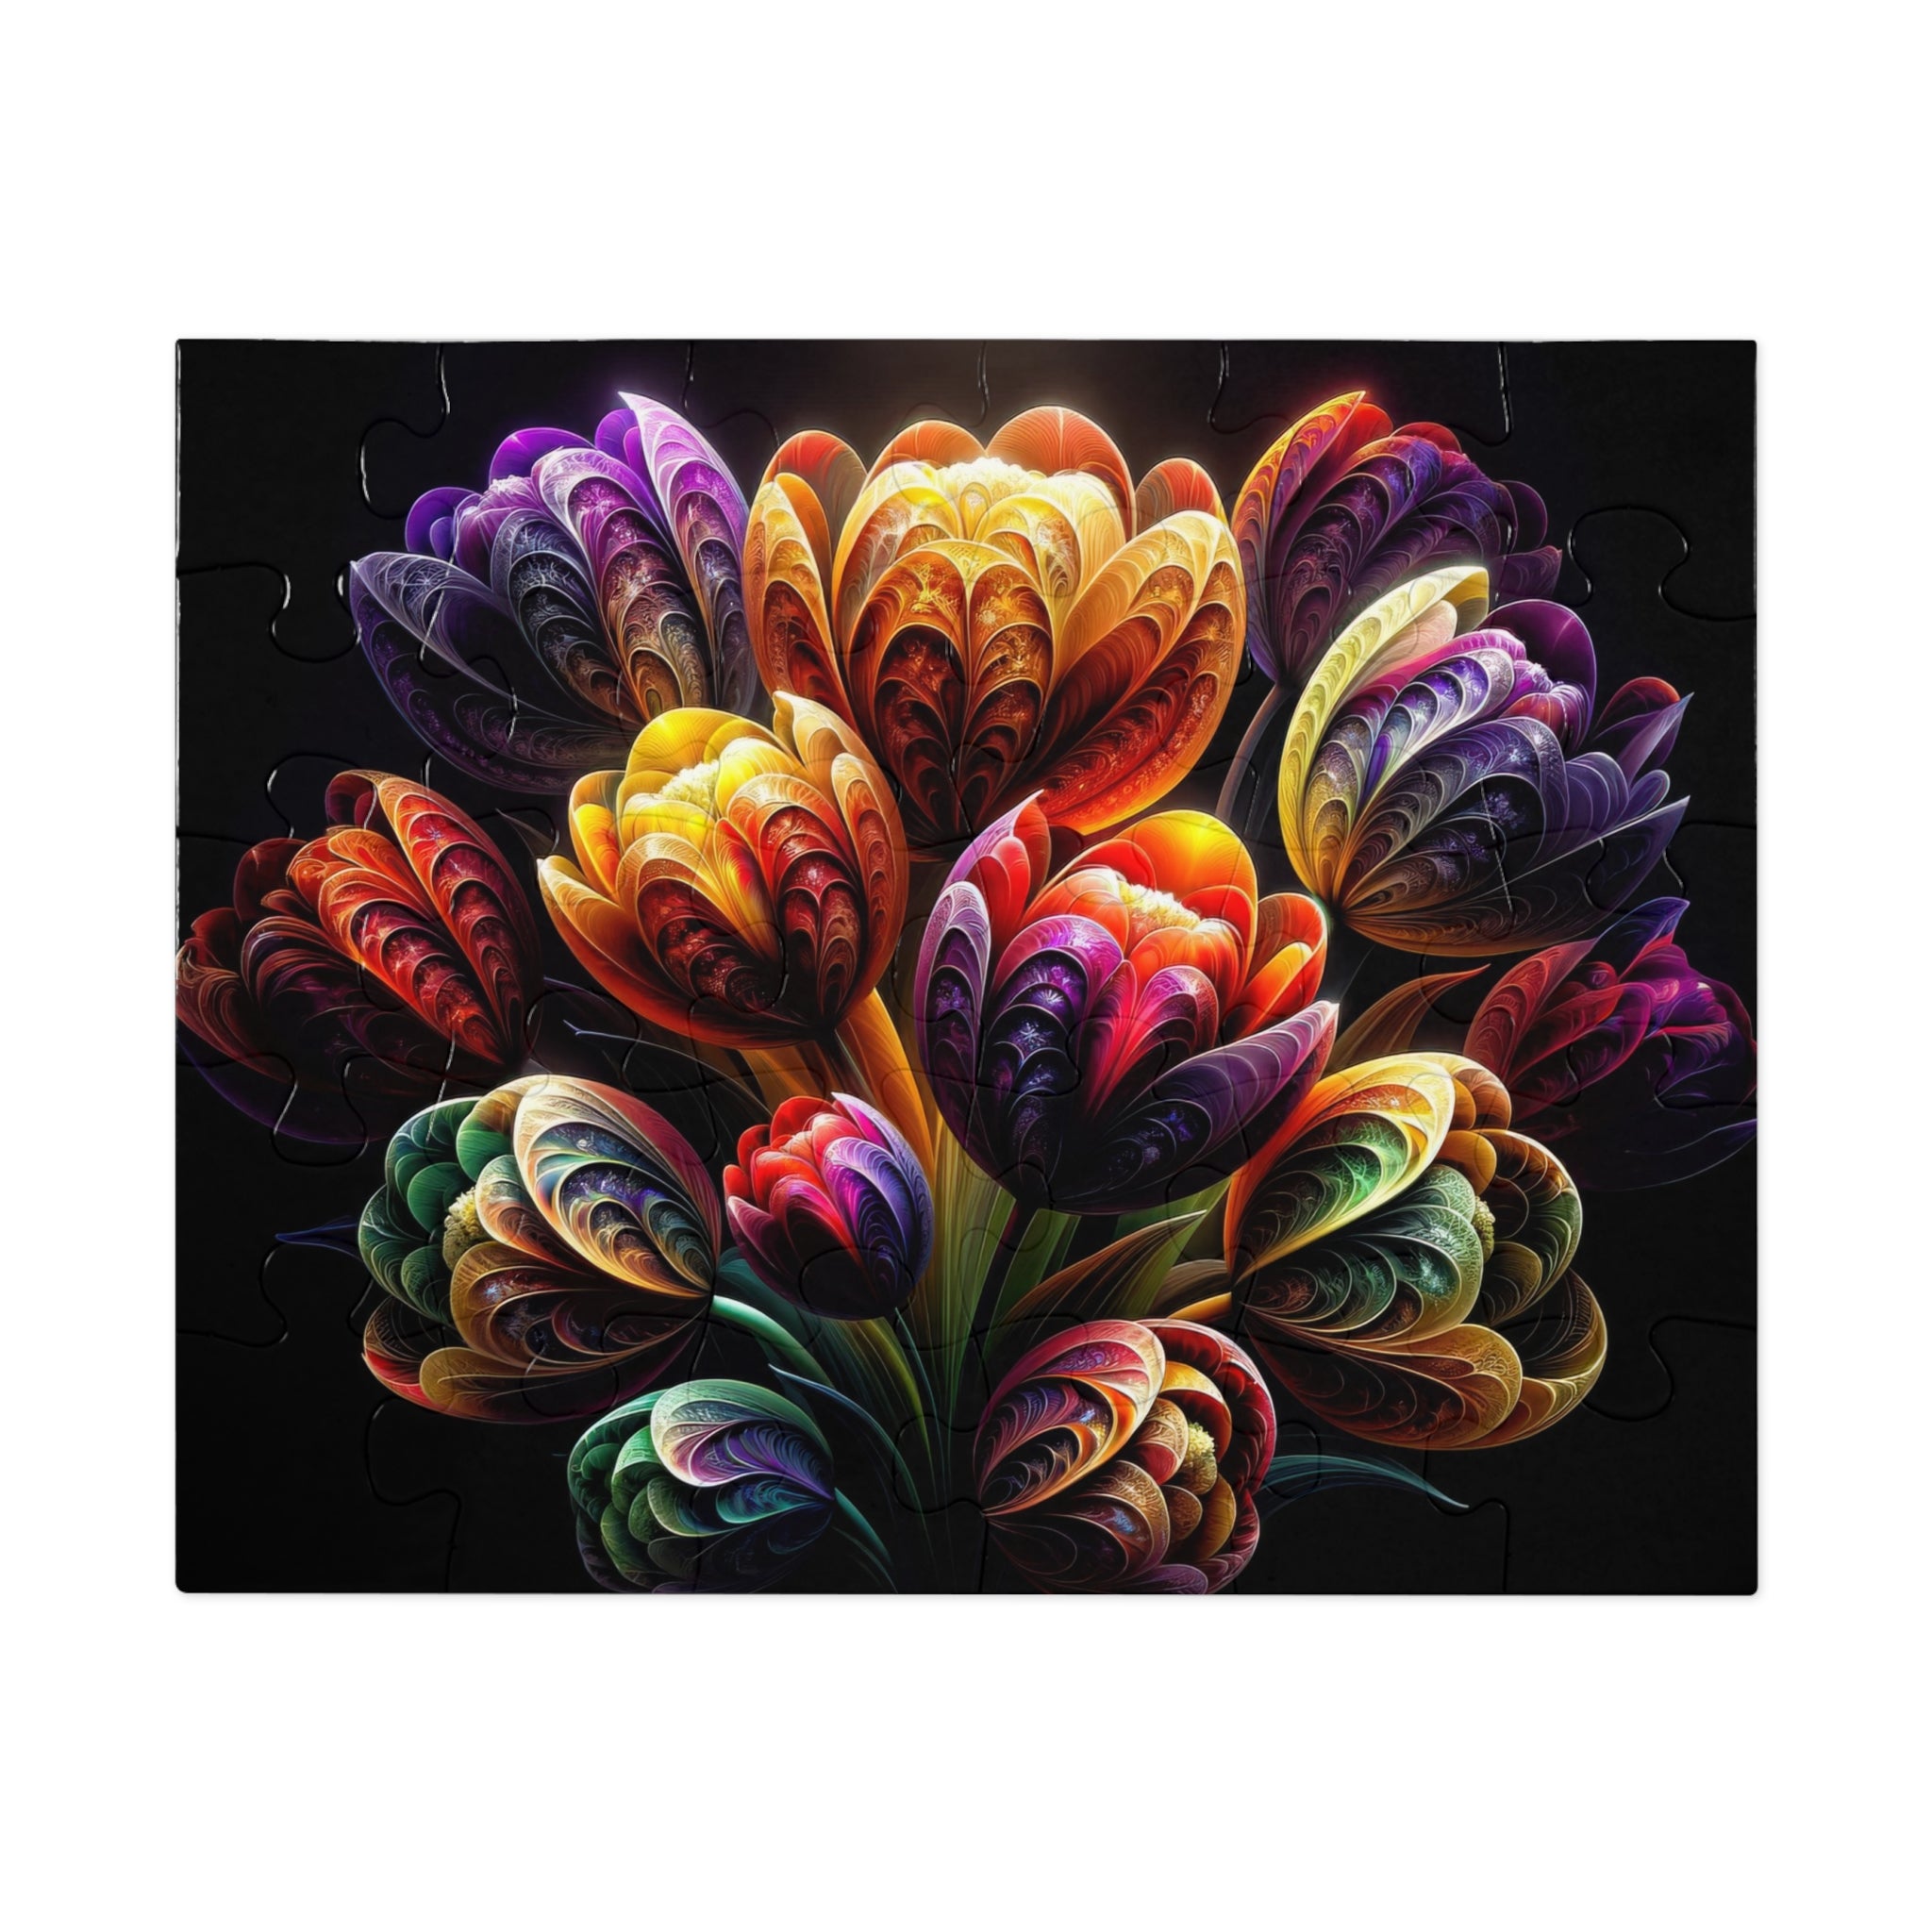 Fractal Bloom Infinity Jigsaw Puzzle